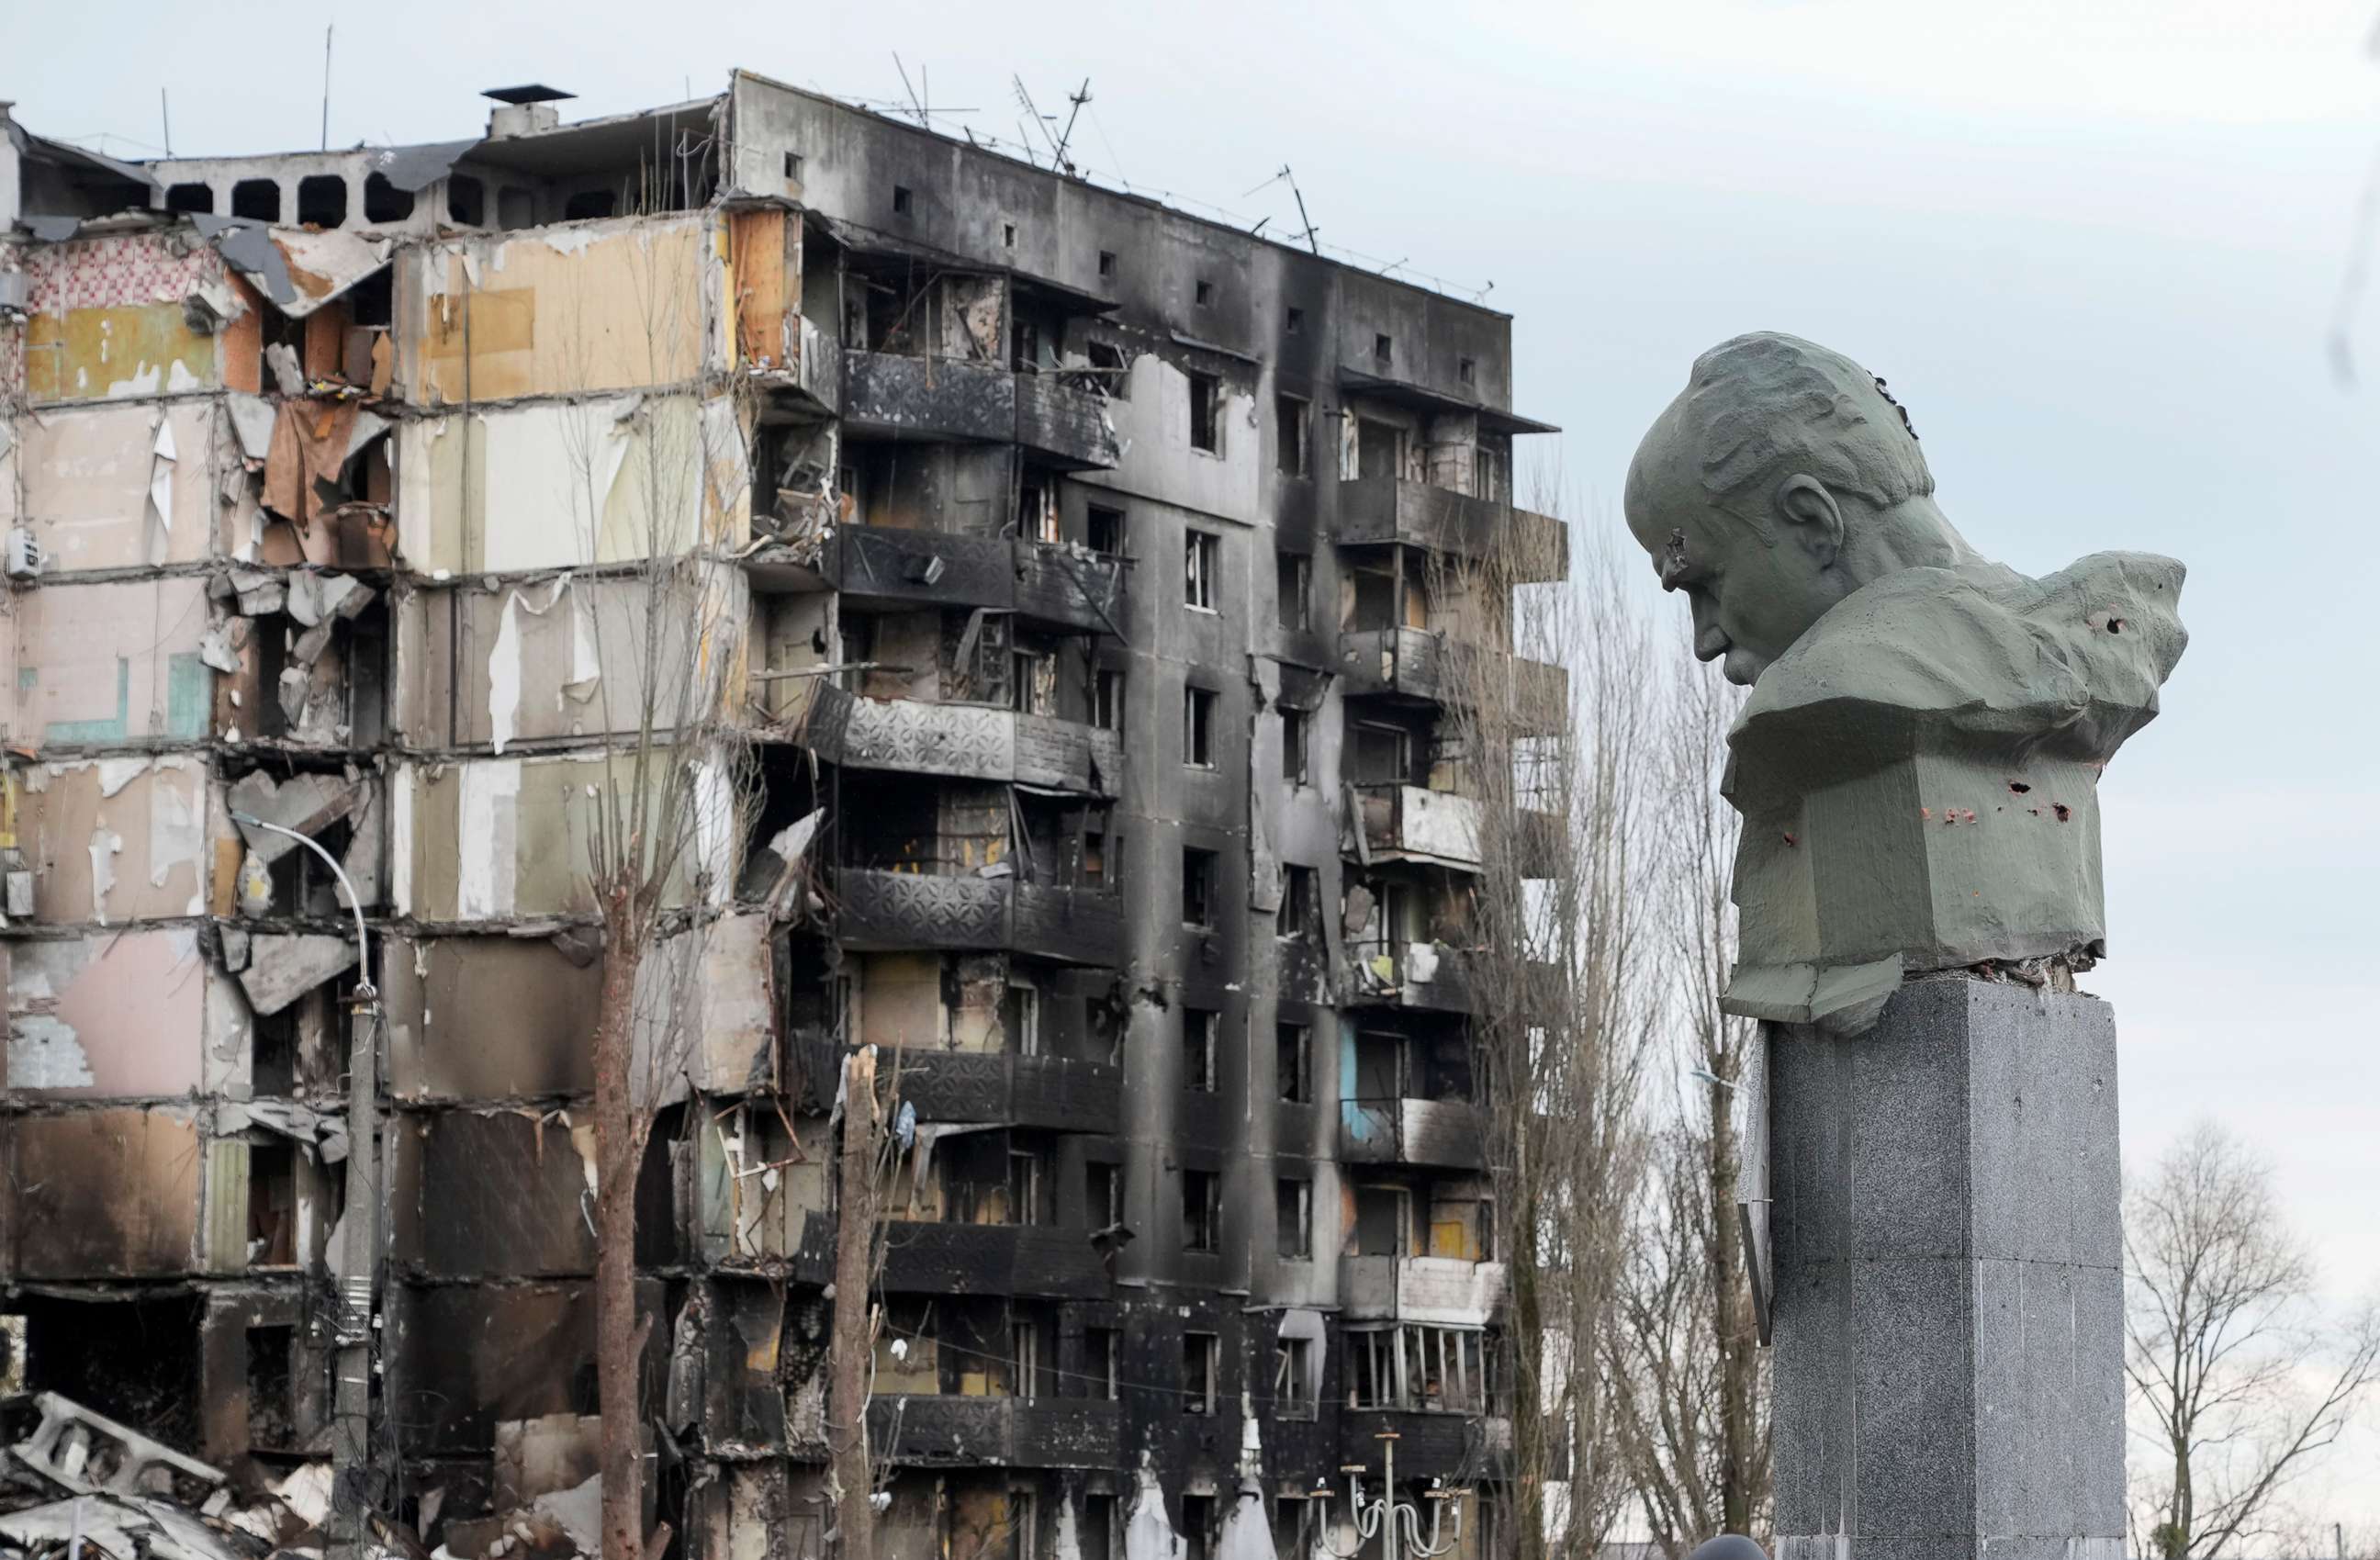 PHOTO: A monument to Taras Shevchenko, a Ukrainian poet and a national symbol, showing damage from bullets, stands against the background of an apartment house ruined in the Russian shelling in the central square in Borodyanka, Ukraine, April 6, 2022.